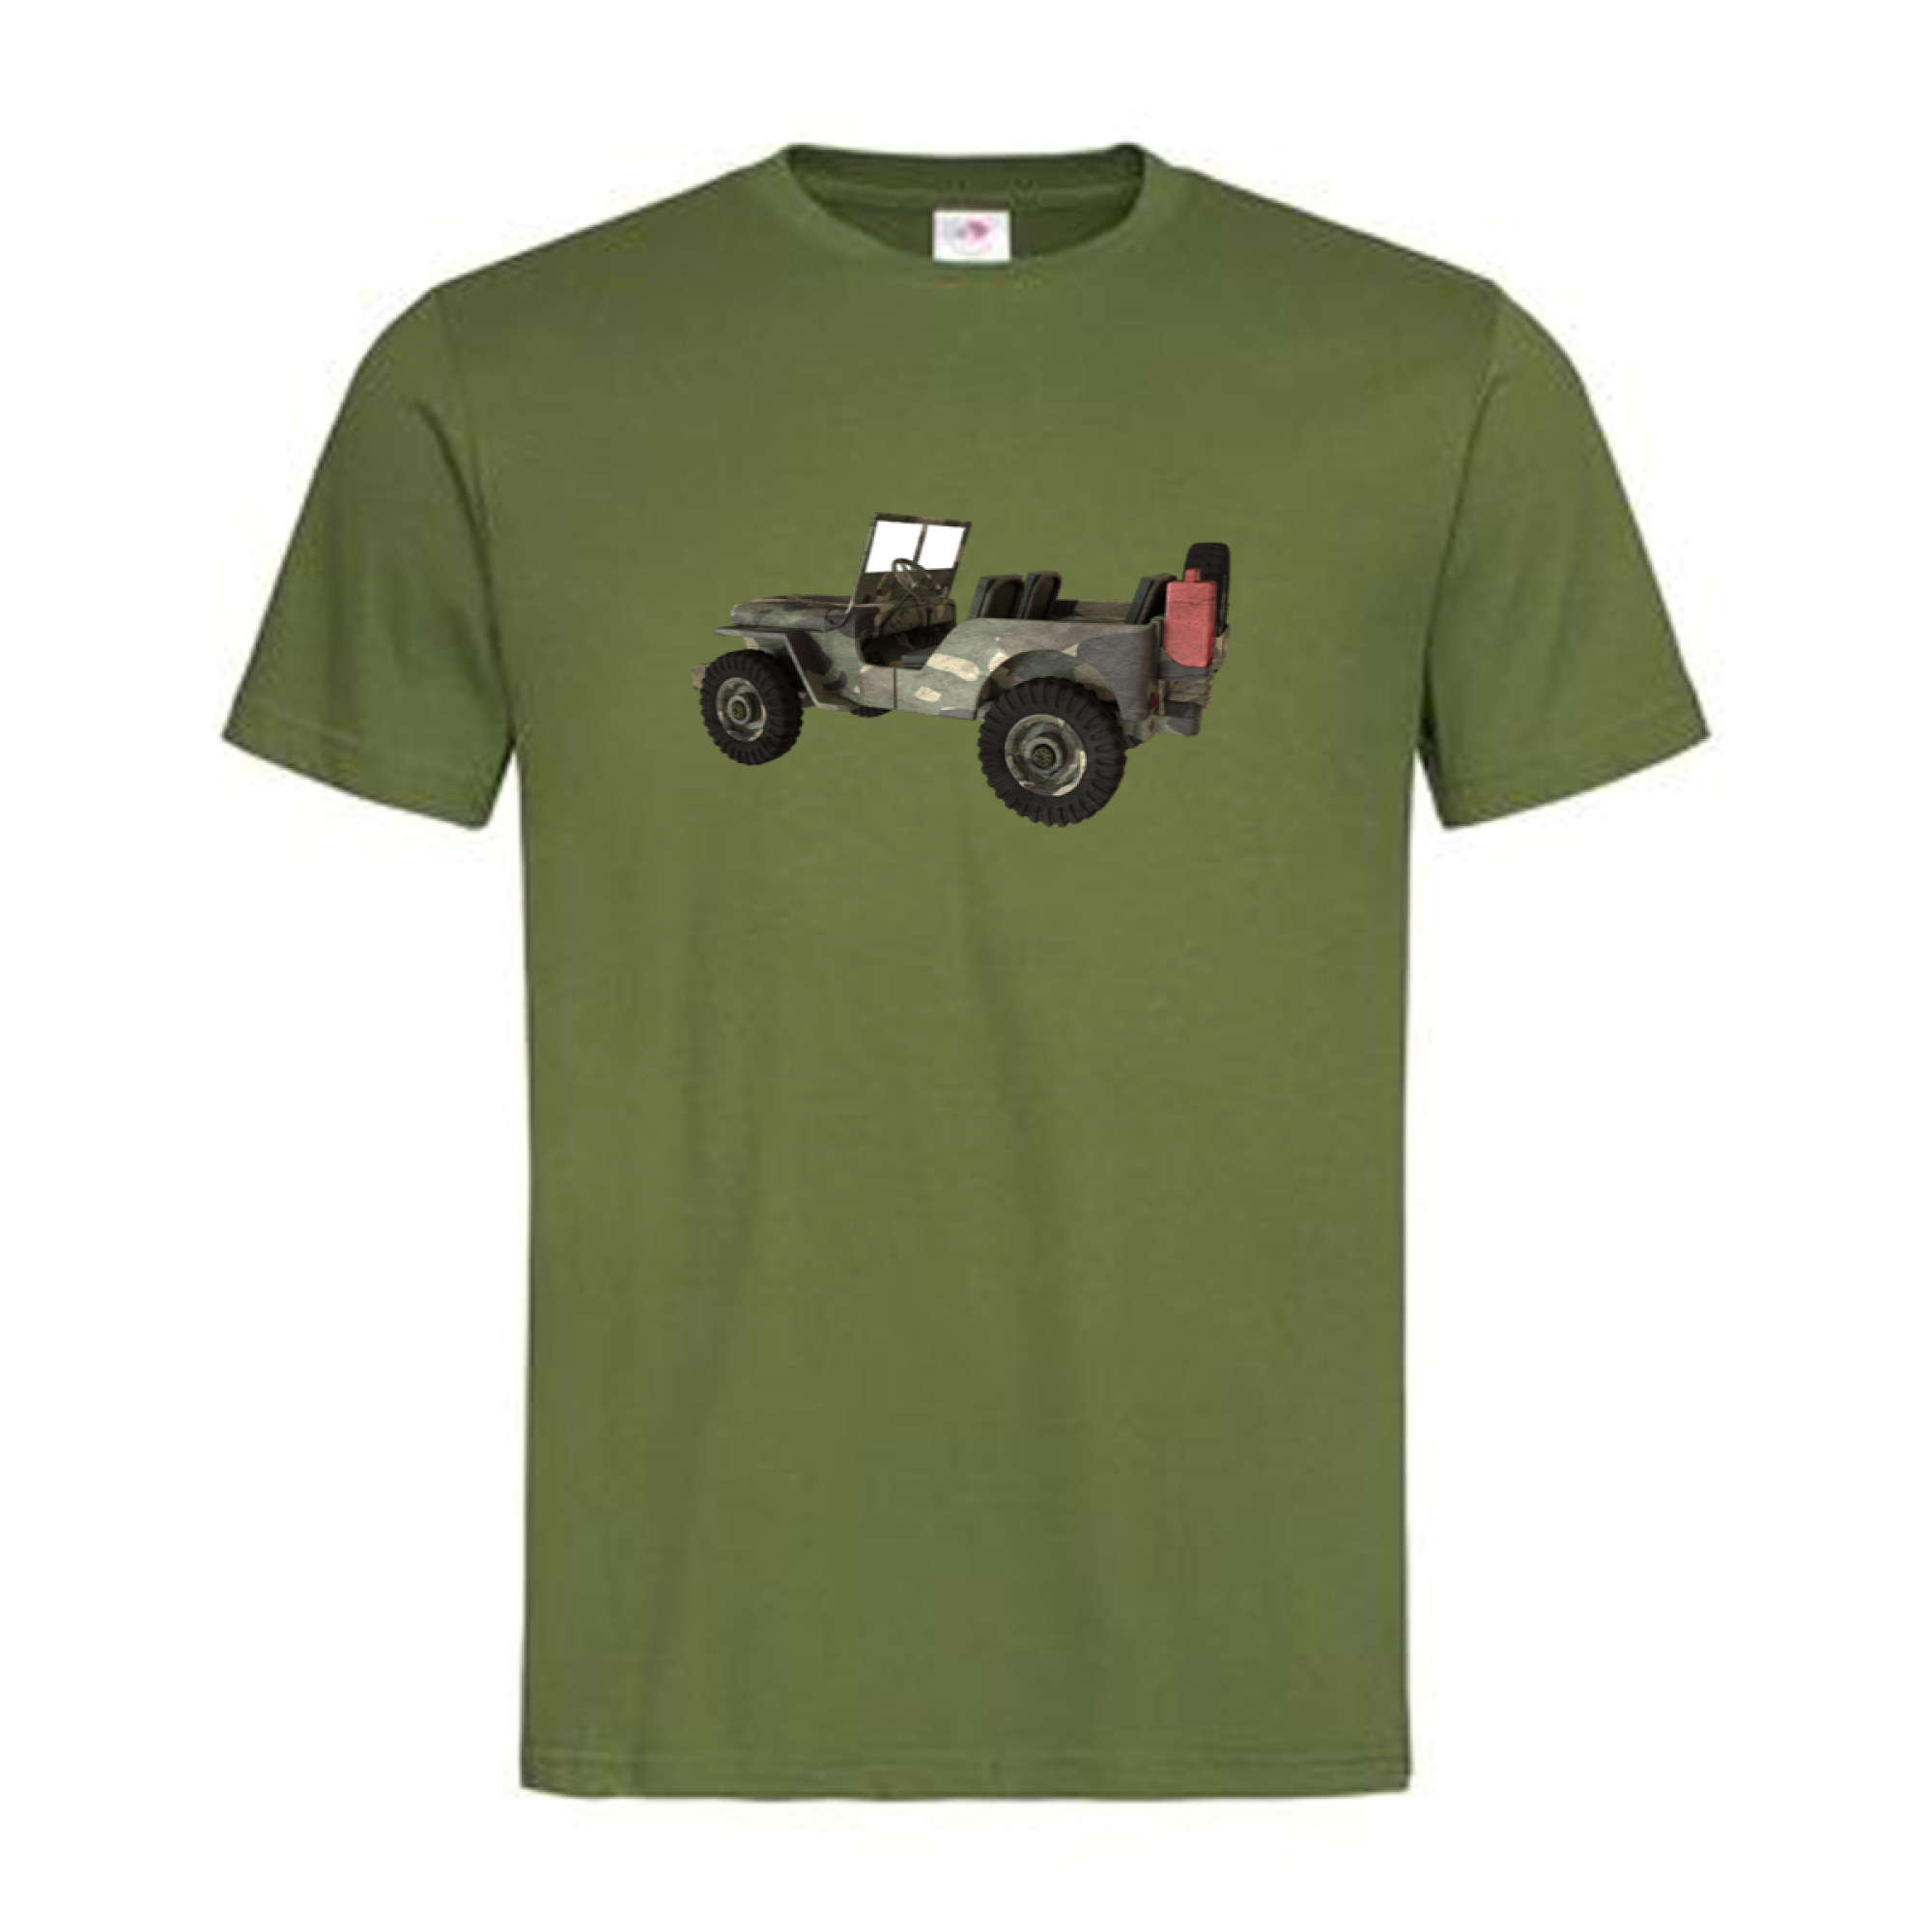 T-Shirt Army Jeep – Vintage Look